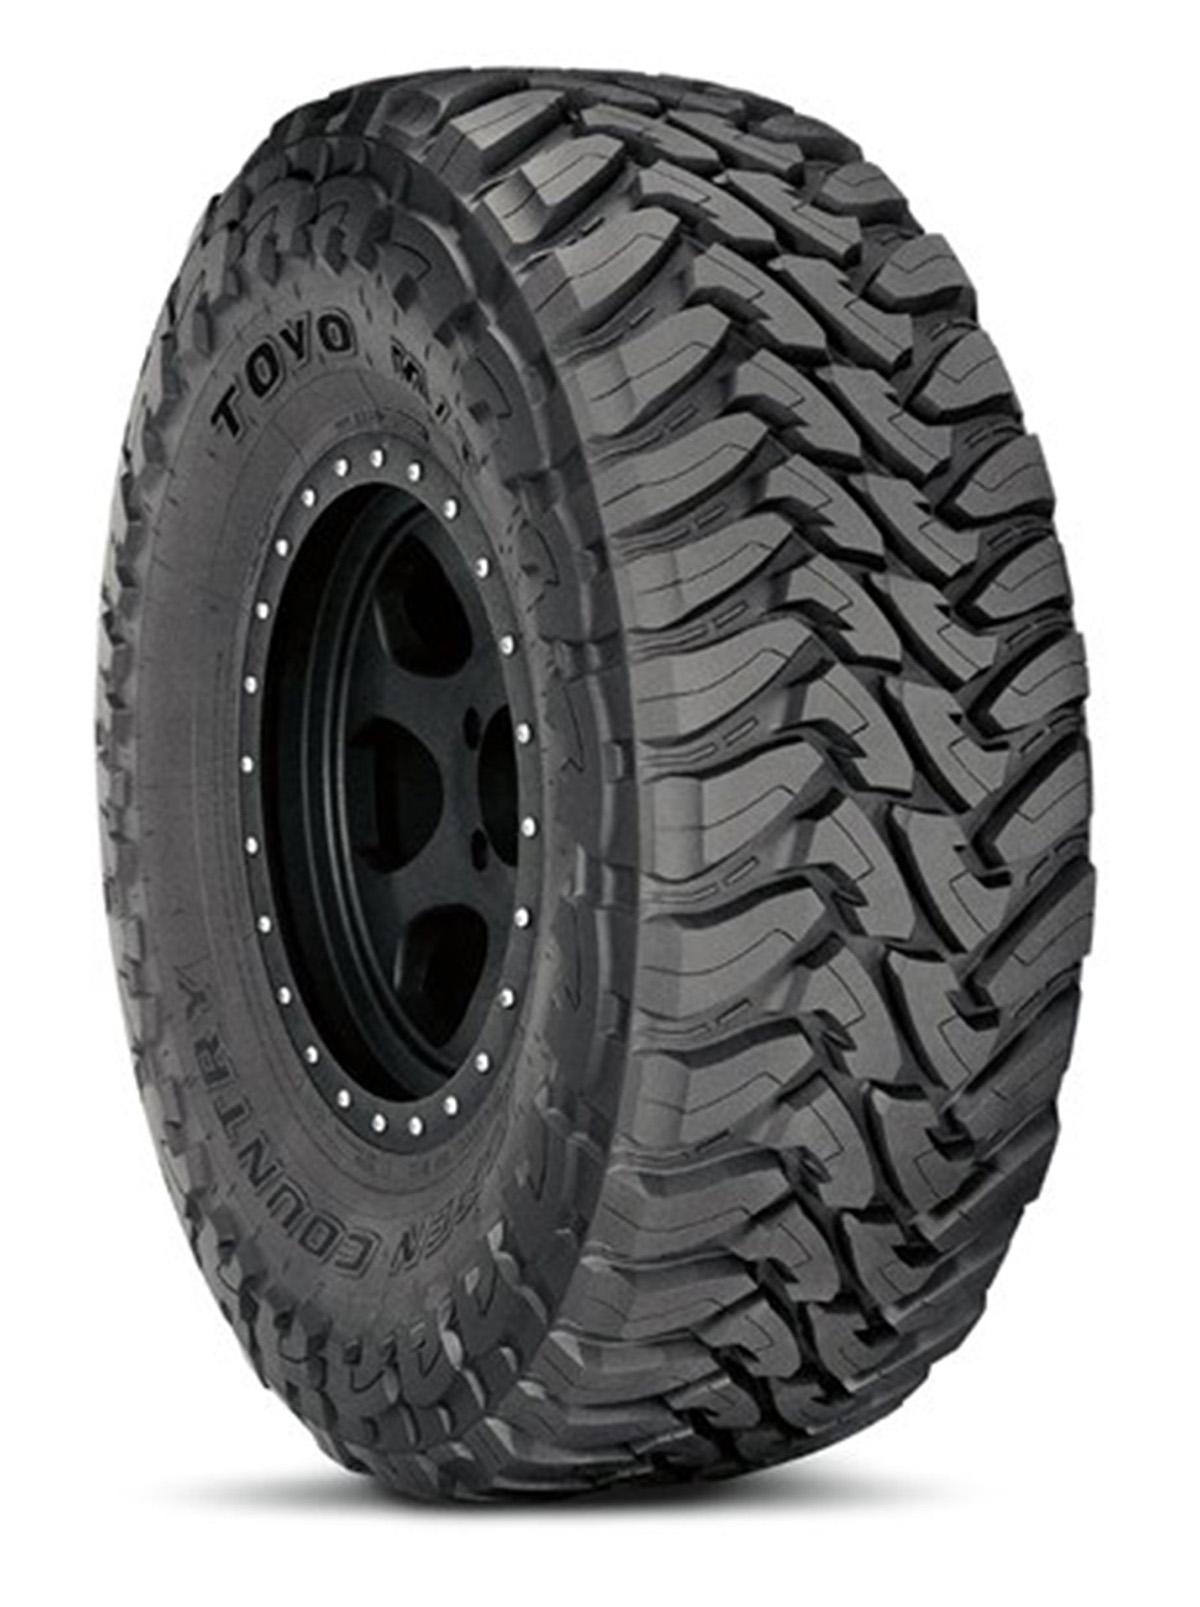 Toyo - OPEN COUNTRY MT  NW  250/35R15